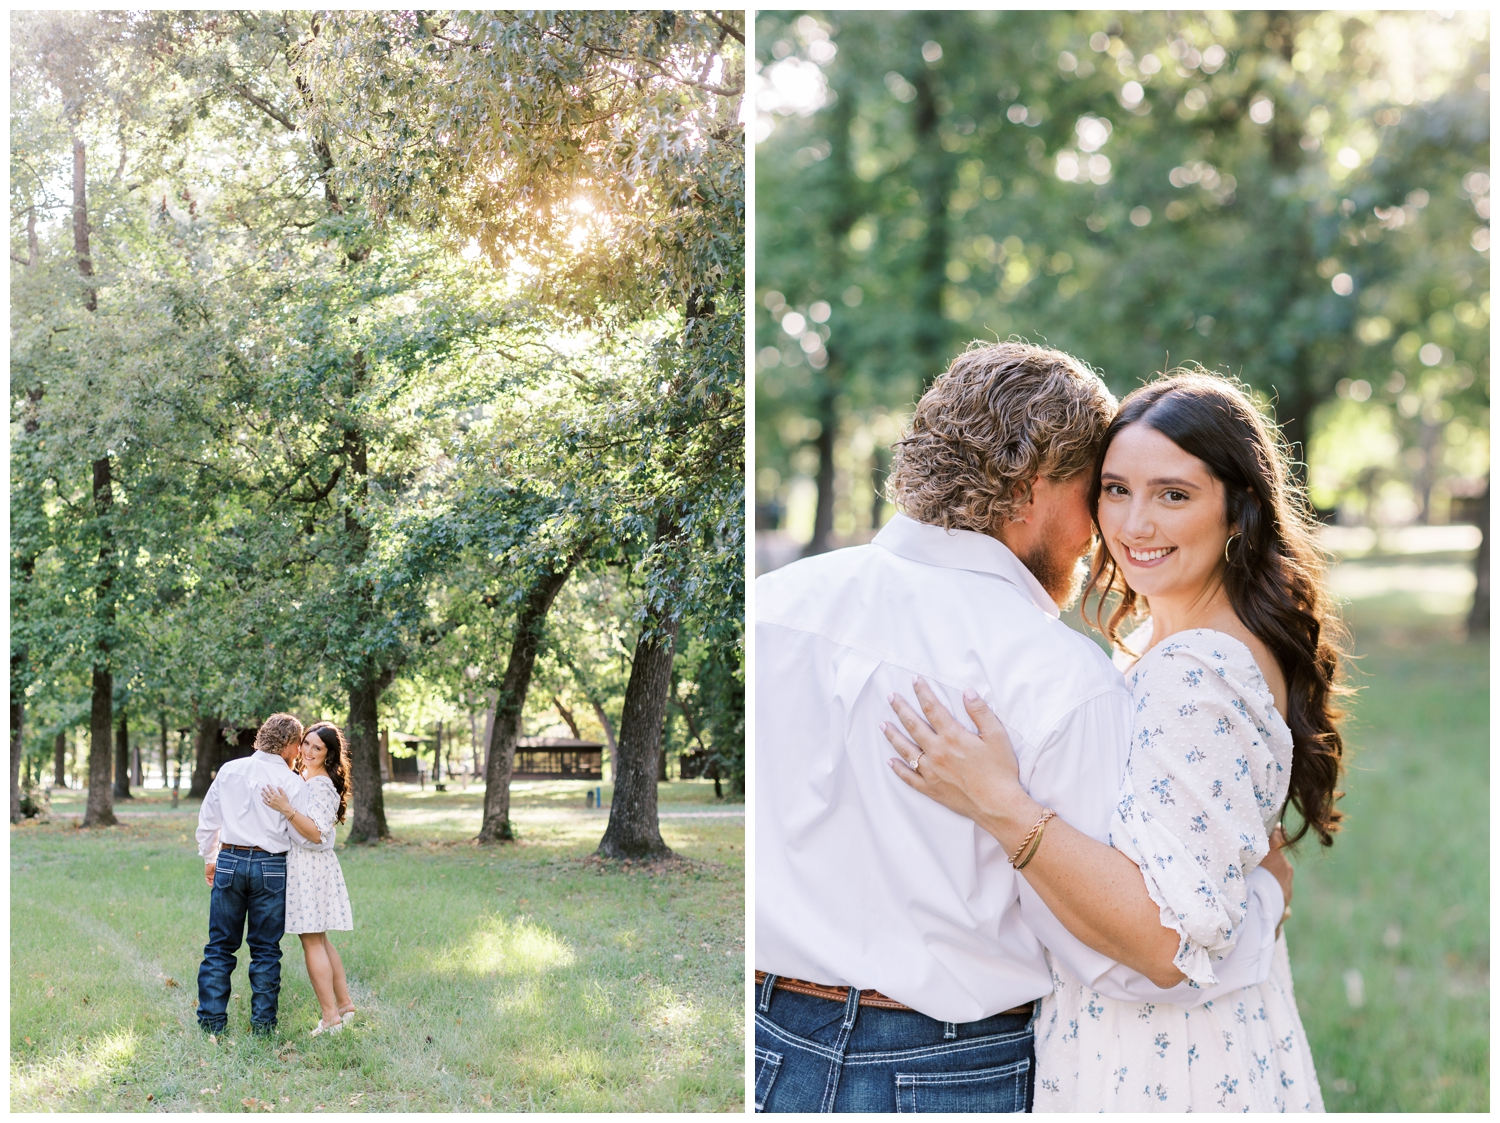 couple nuzzling at Huntsville State park under trees during golden hour